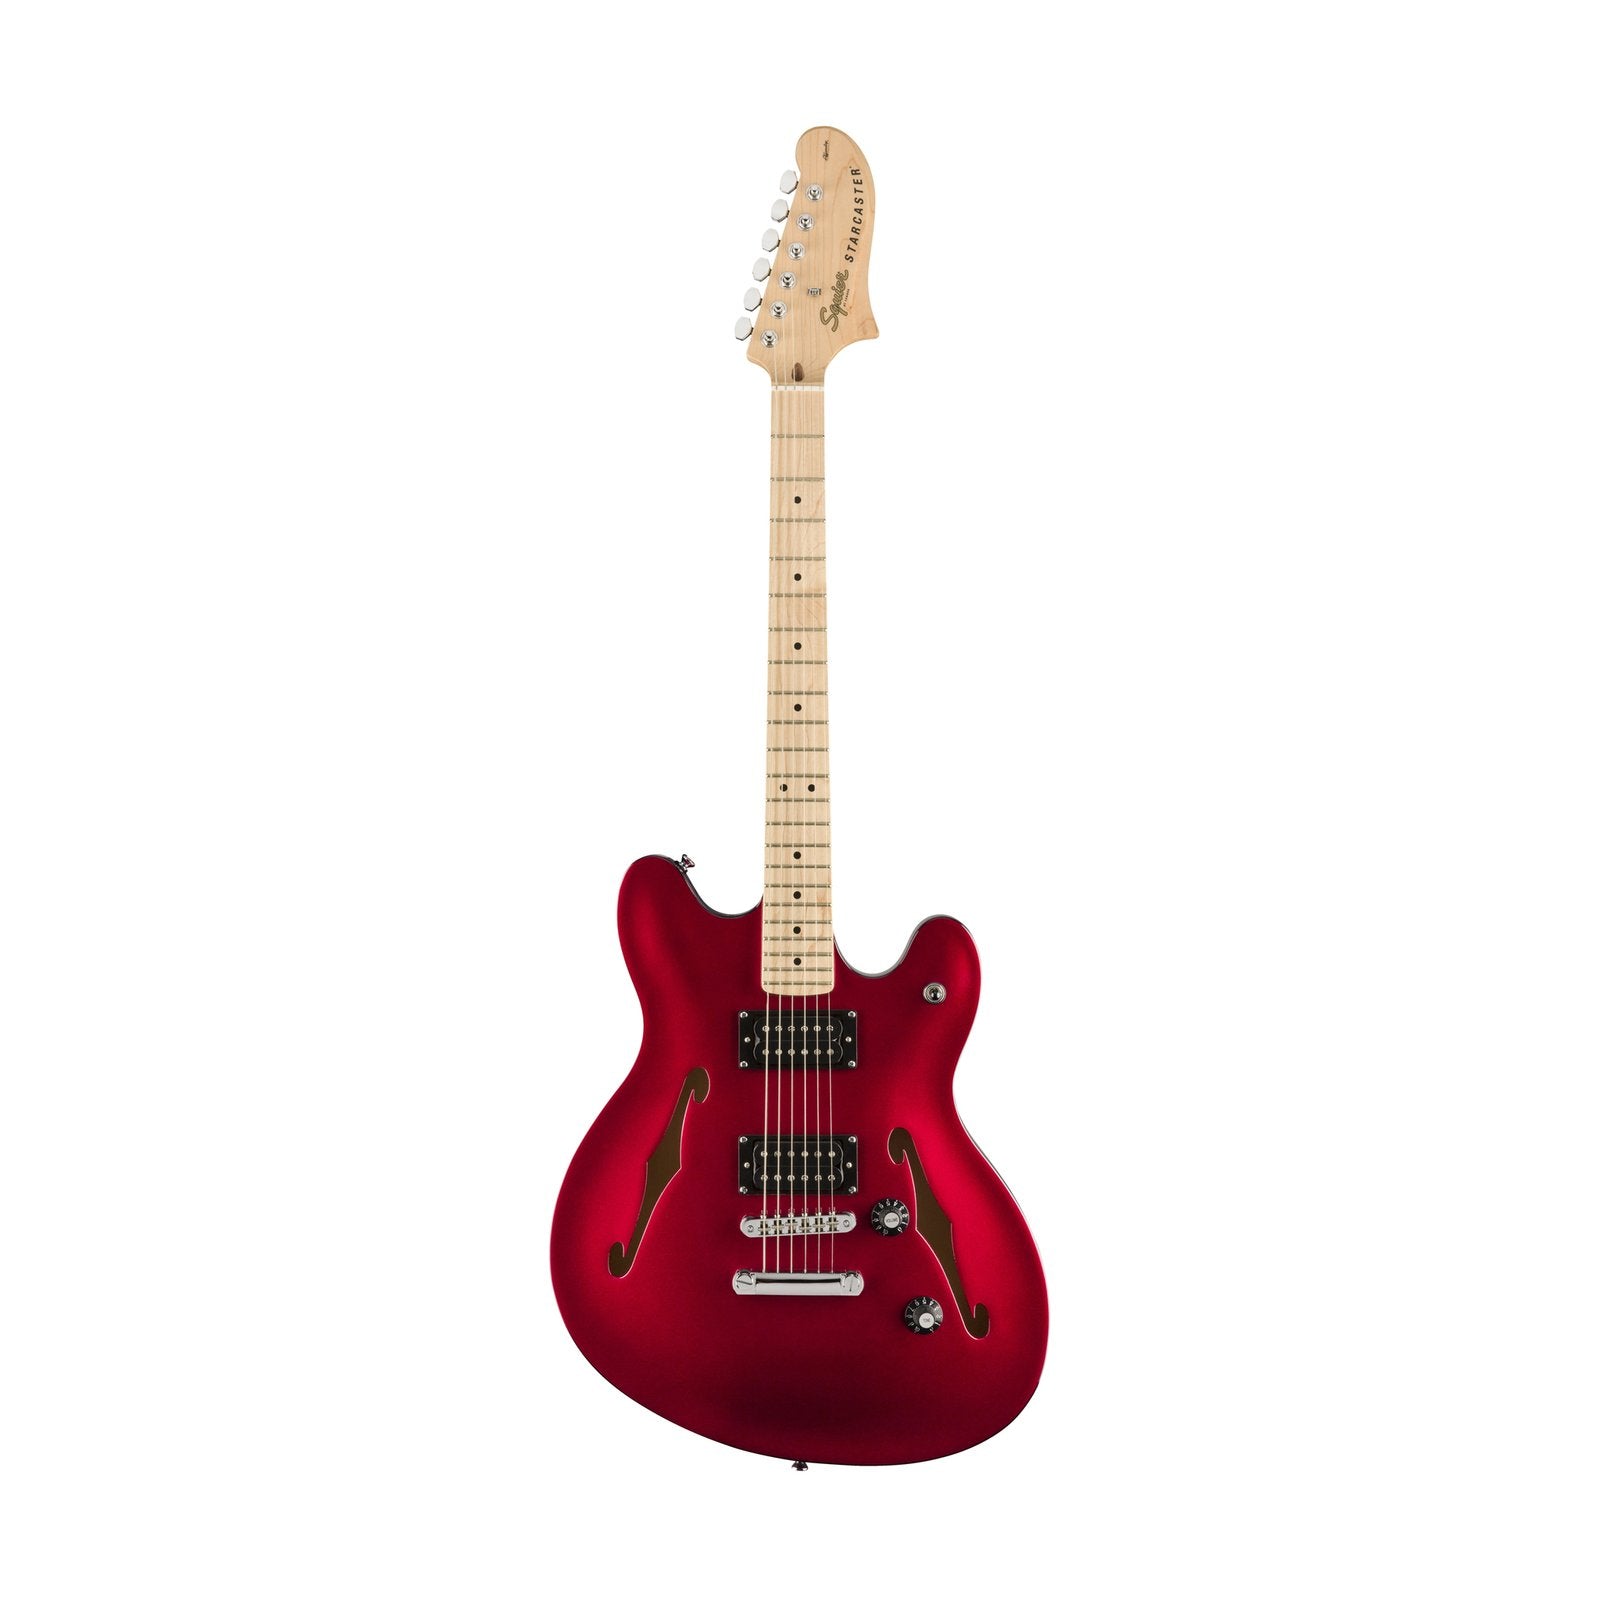 Squier Affinity Series Starcaster Electric Guitar, Maple FB, Candy Apple Red, SQUIER BY FENDER, ELECTRIC GUITAR, squier-by-fender-electric-guitar-037-0590-509, ZOSO MUSIC SDN BHD